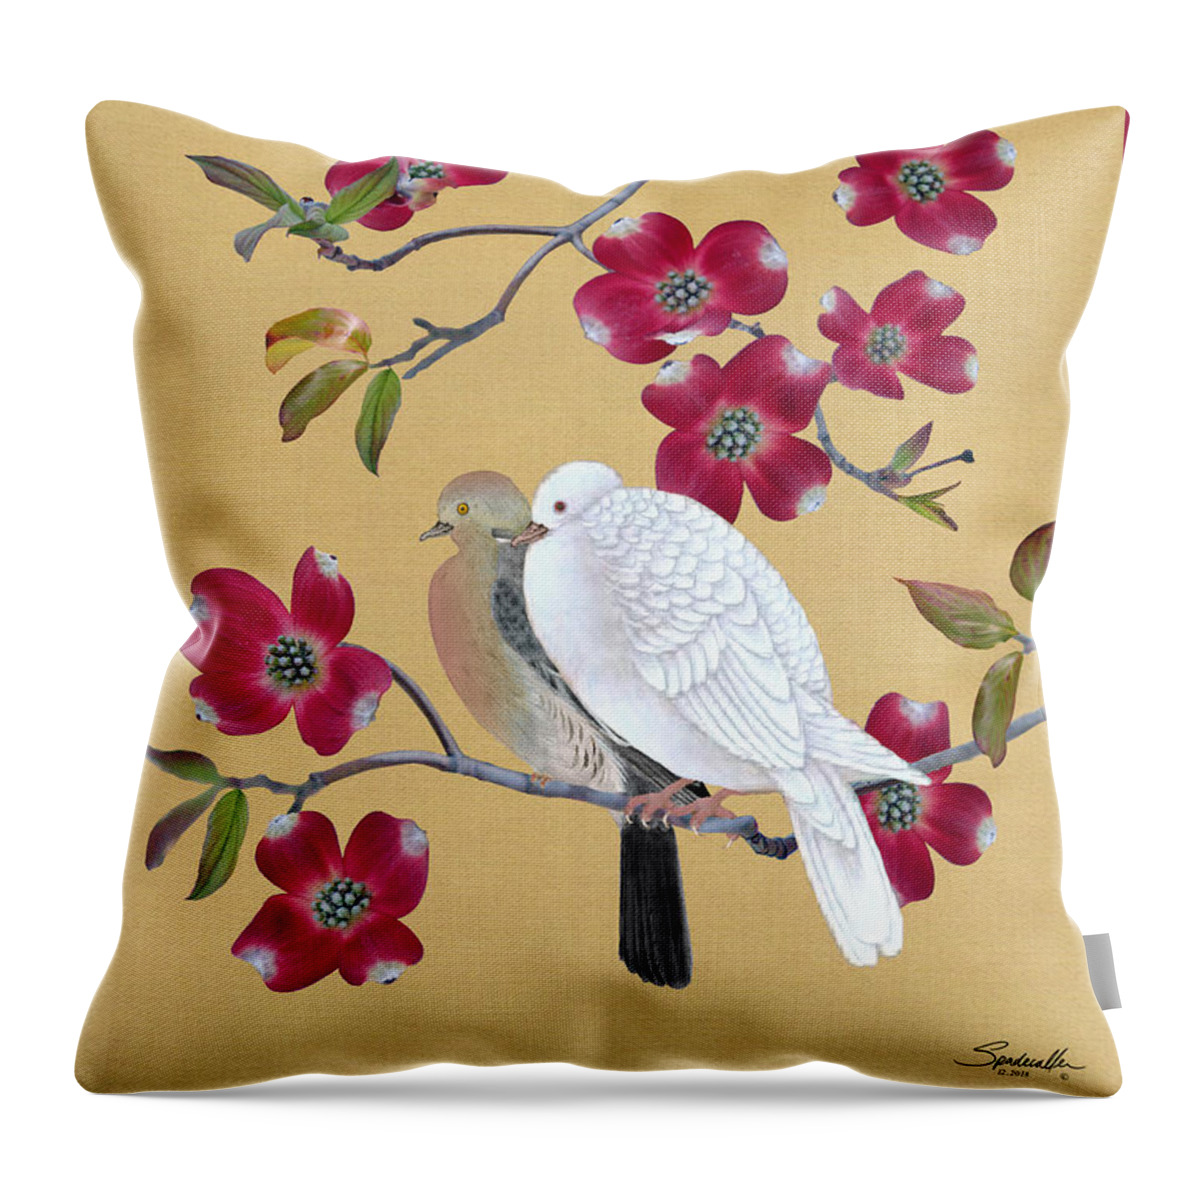 Doves Throw Pillow featuring the digital art Doves In Red Dogwood Tree by M Spadecaller